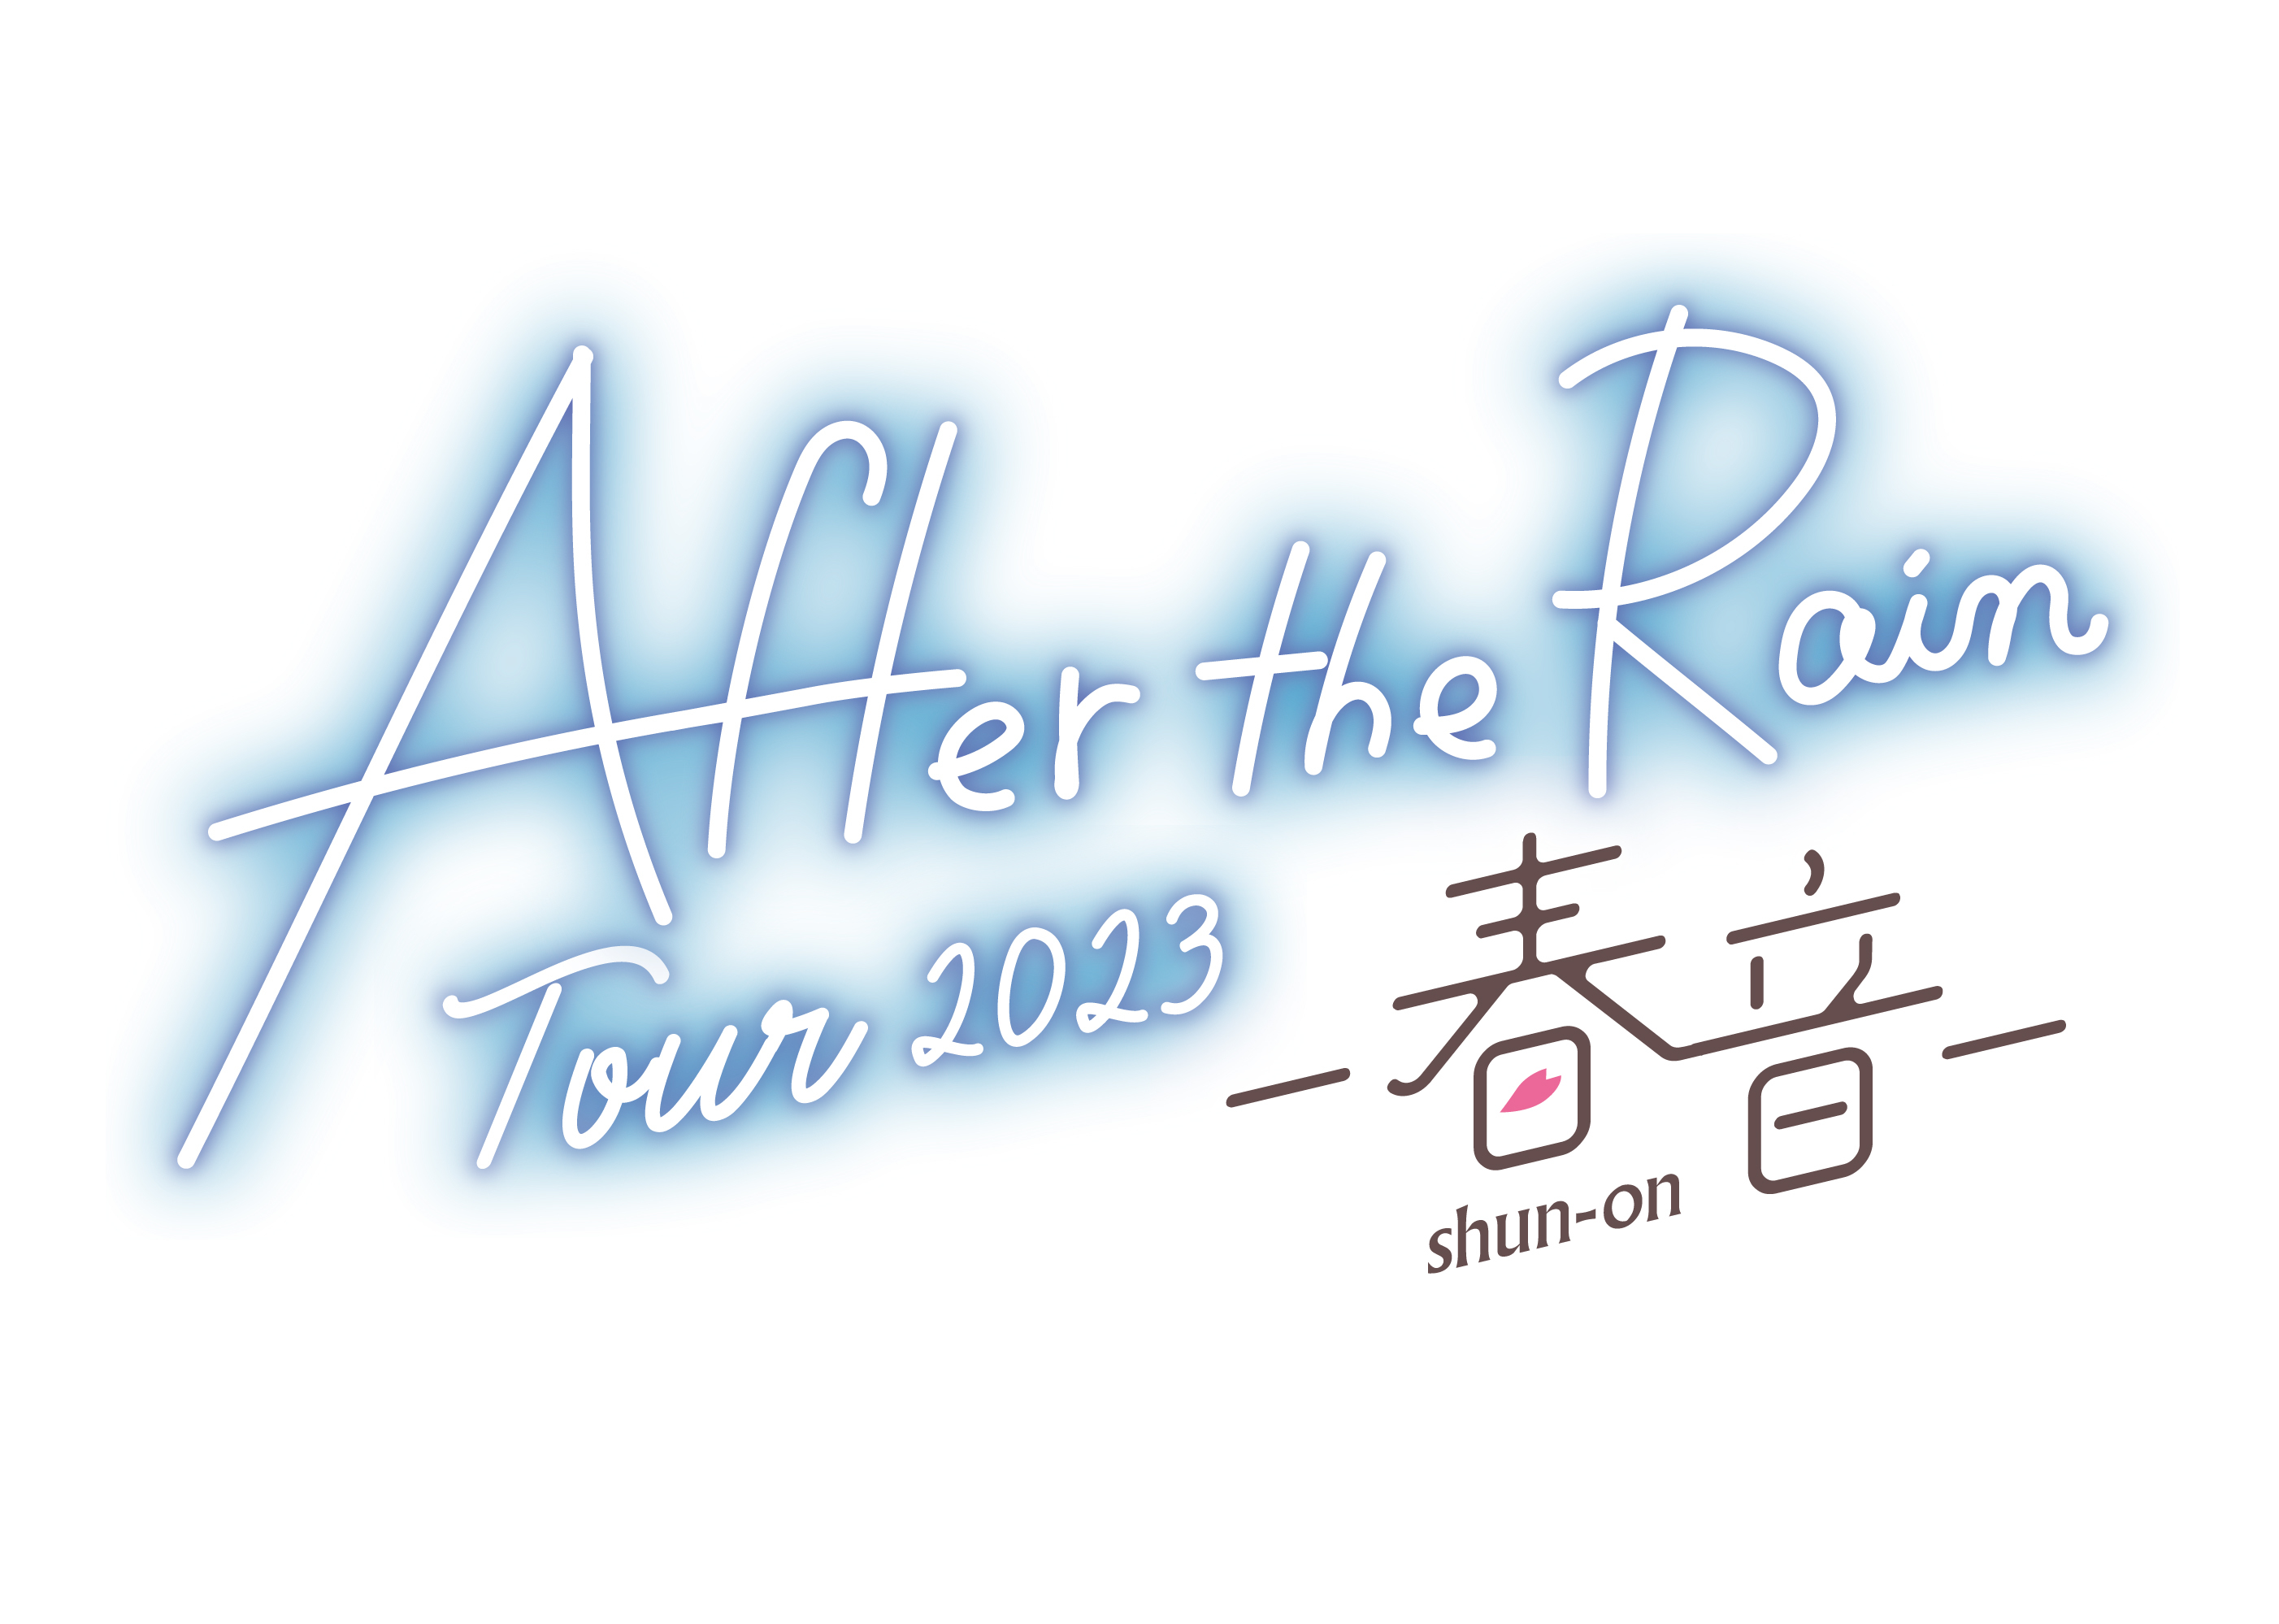 『After the Rain Live 2023 - 春音 -』